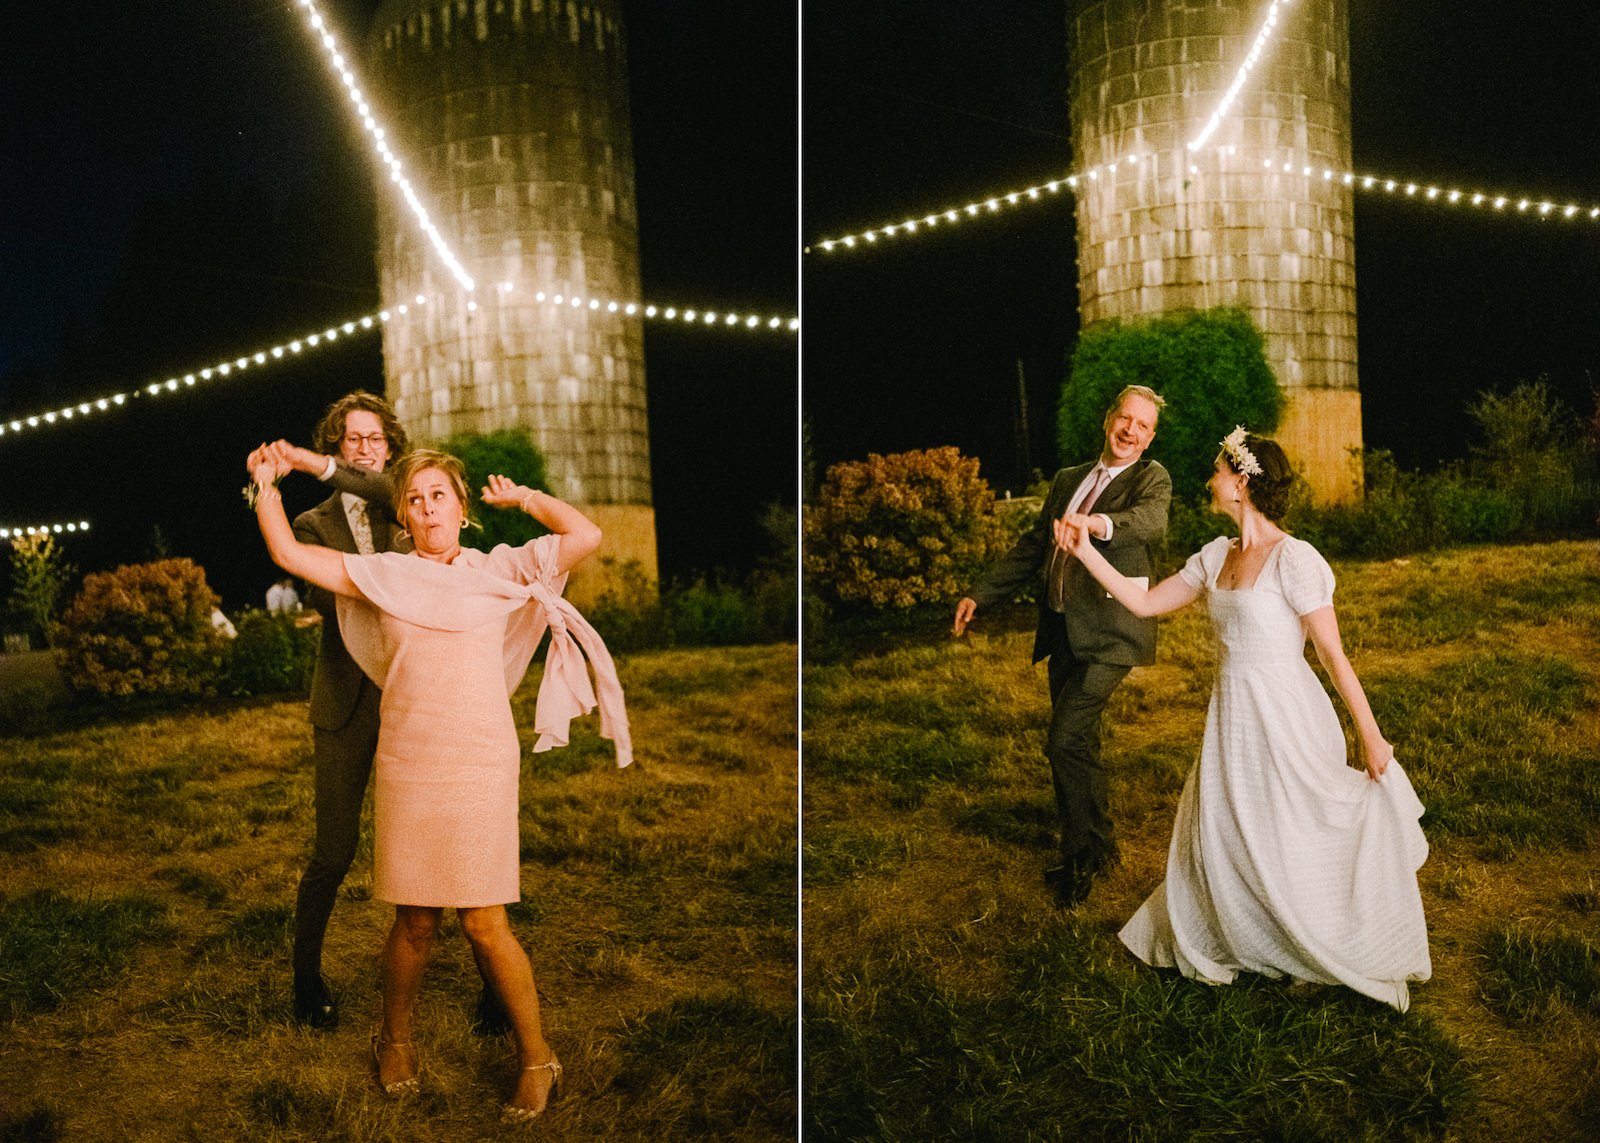  Bride twirls with father in dancing in low light 